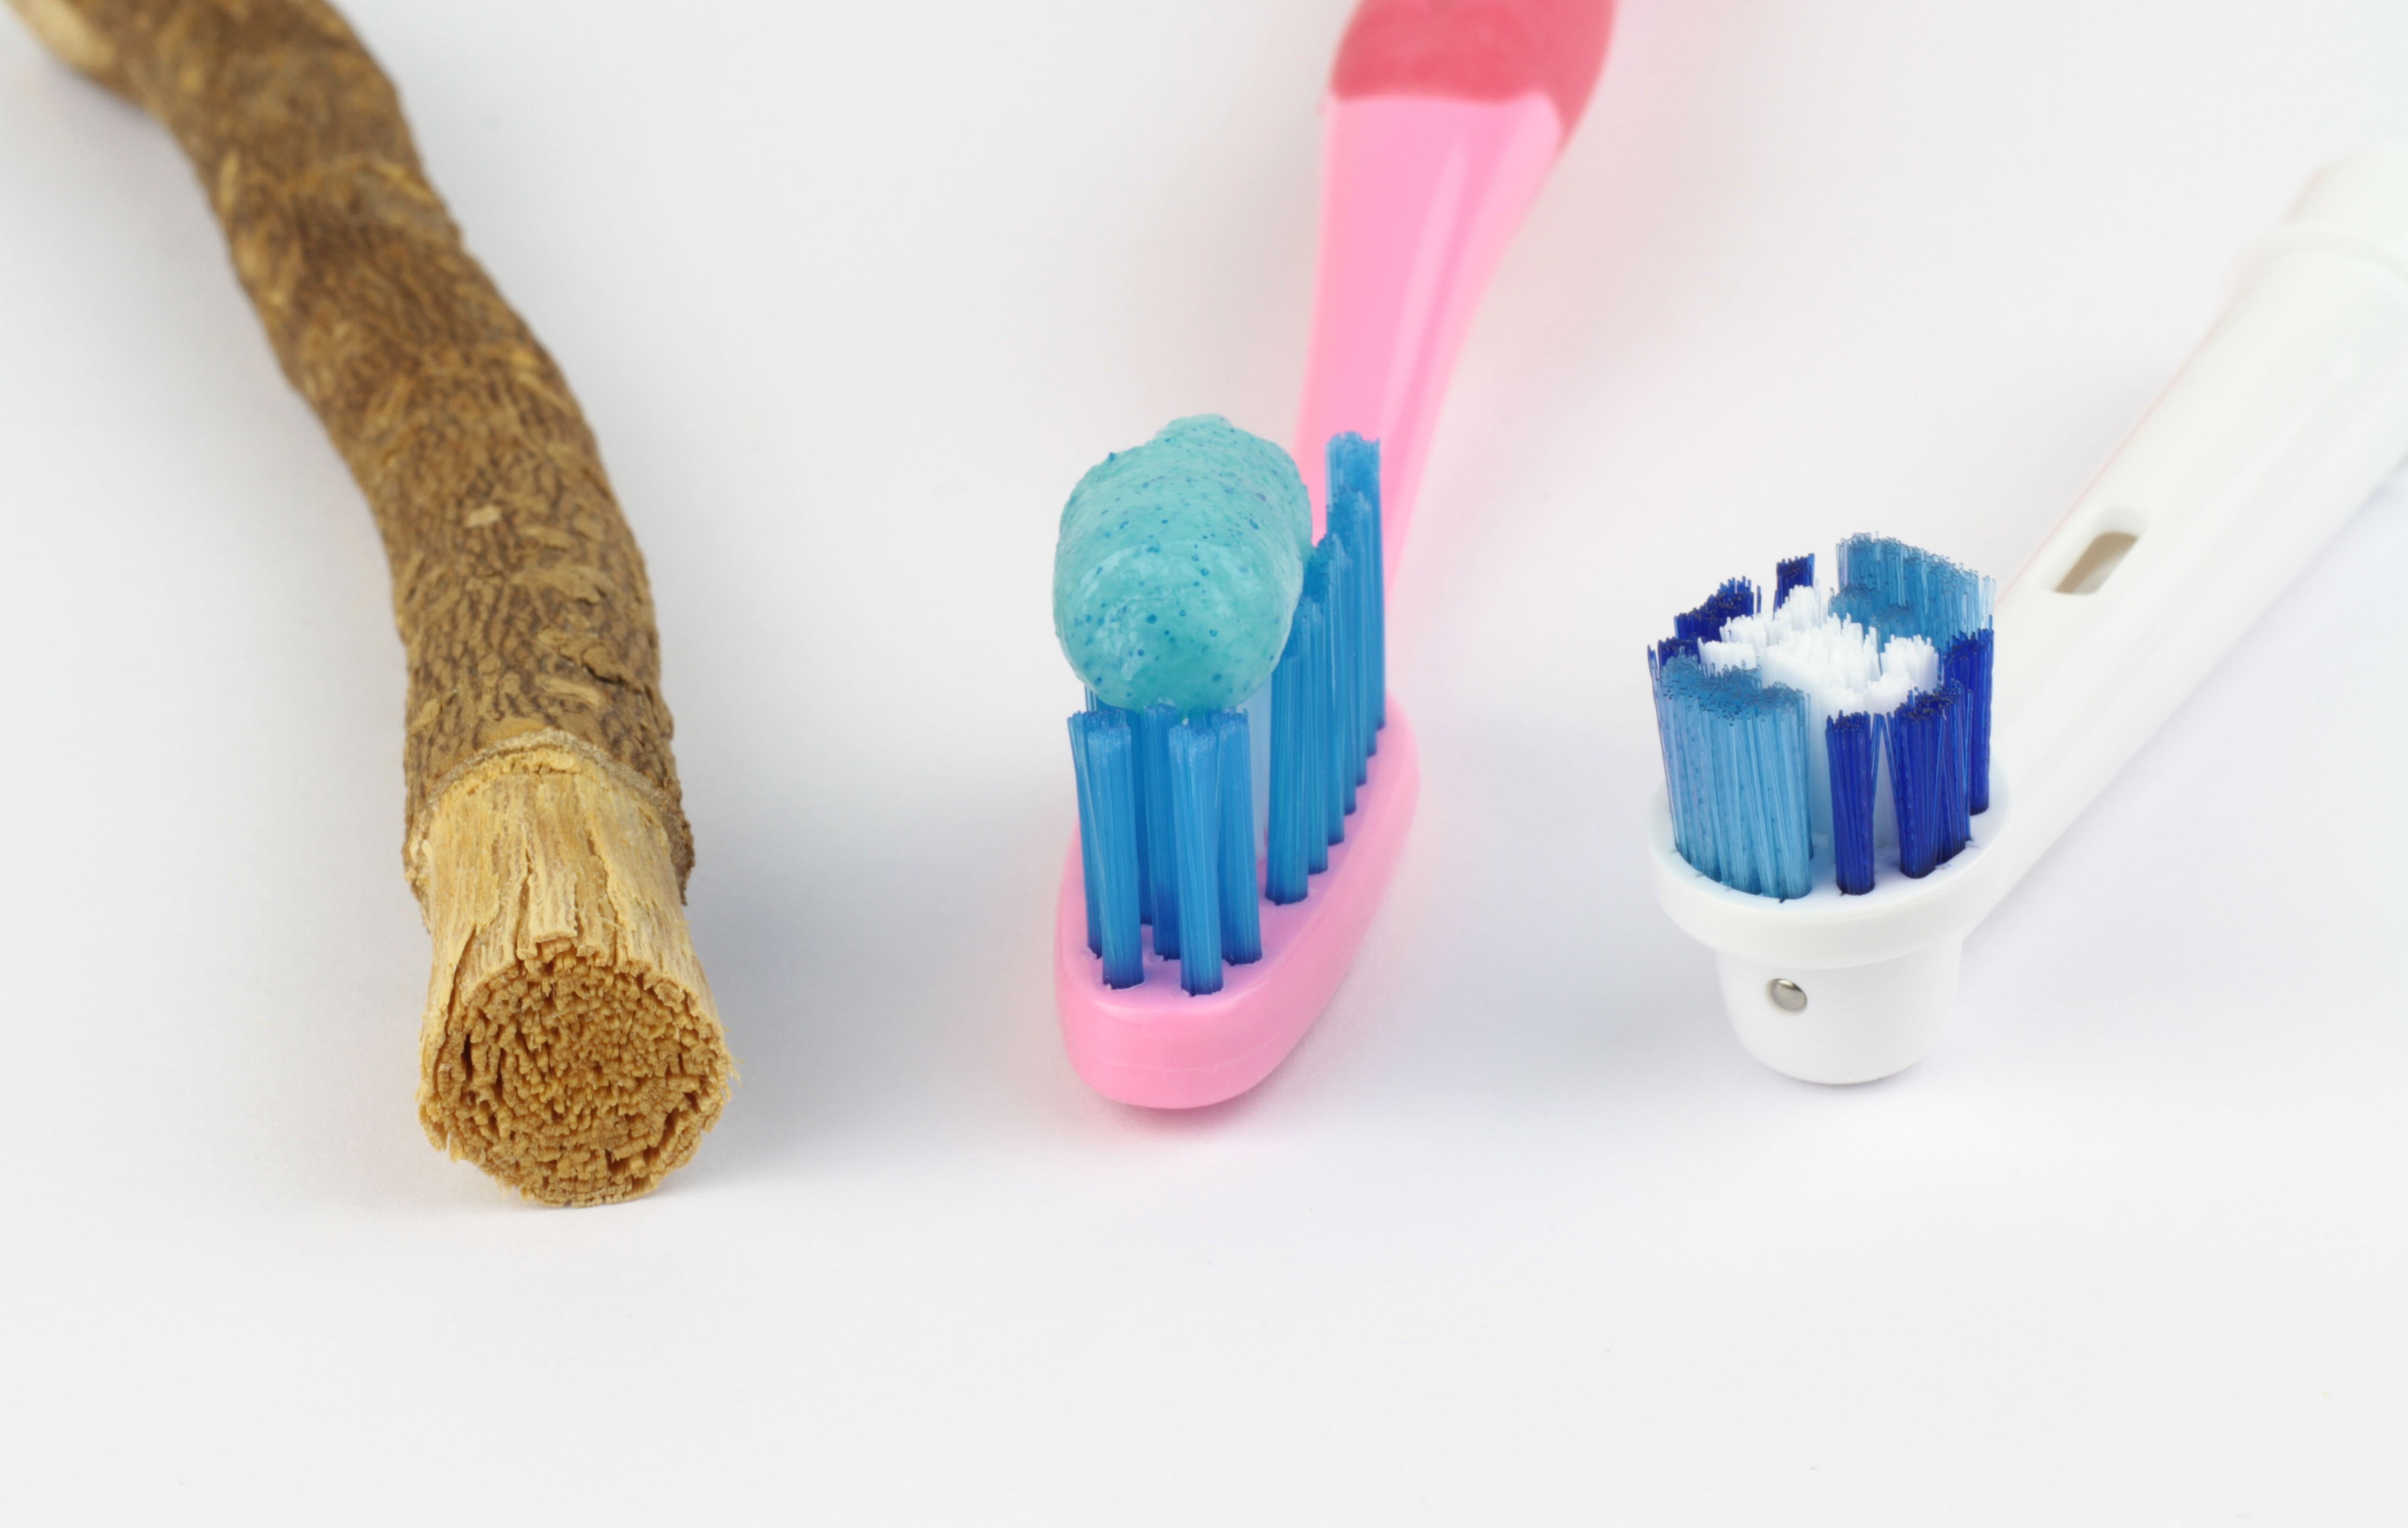 Toothbrushes over the years